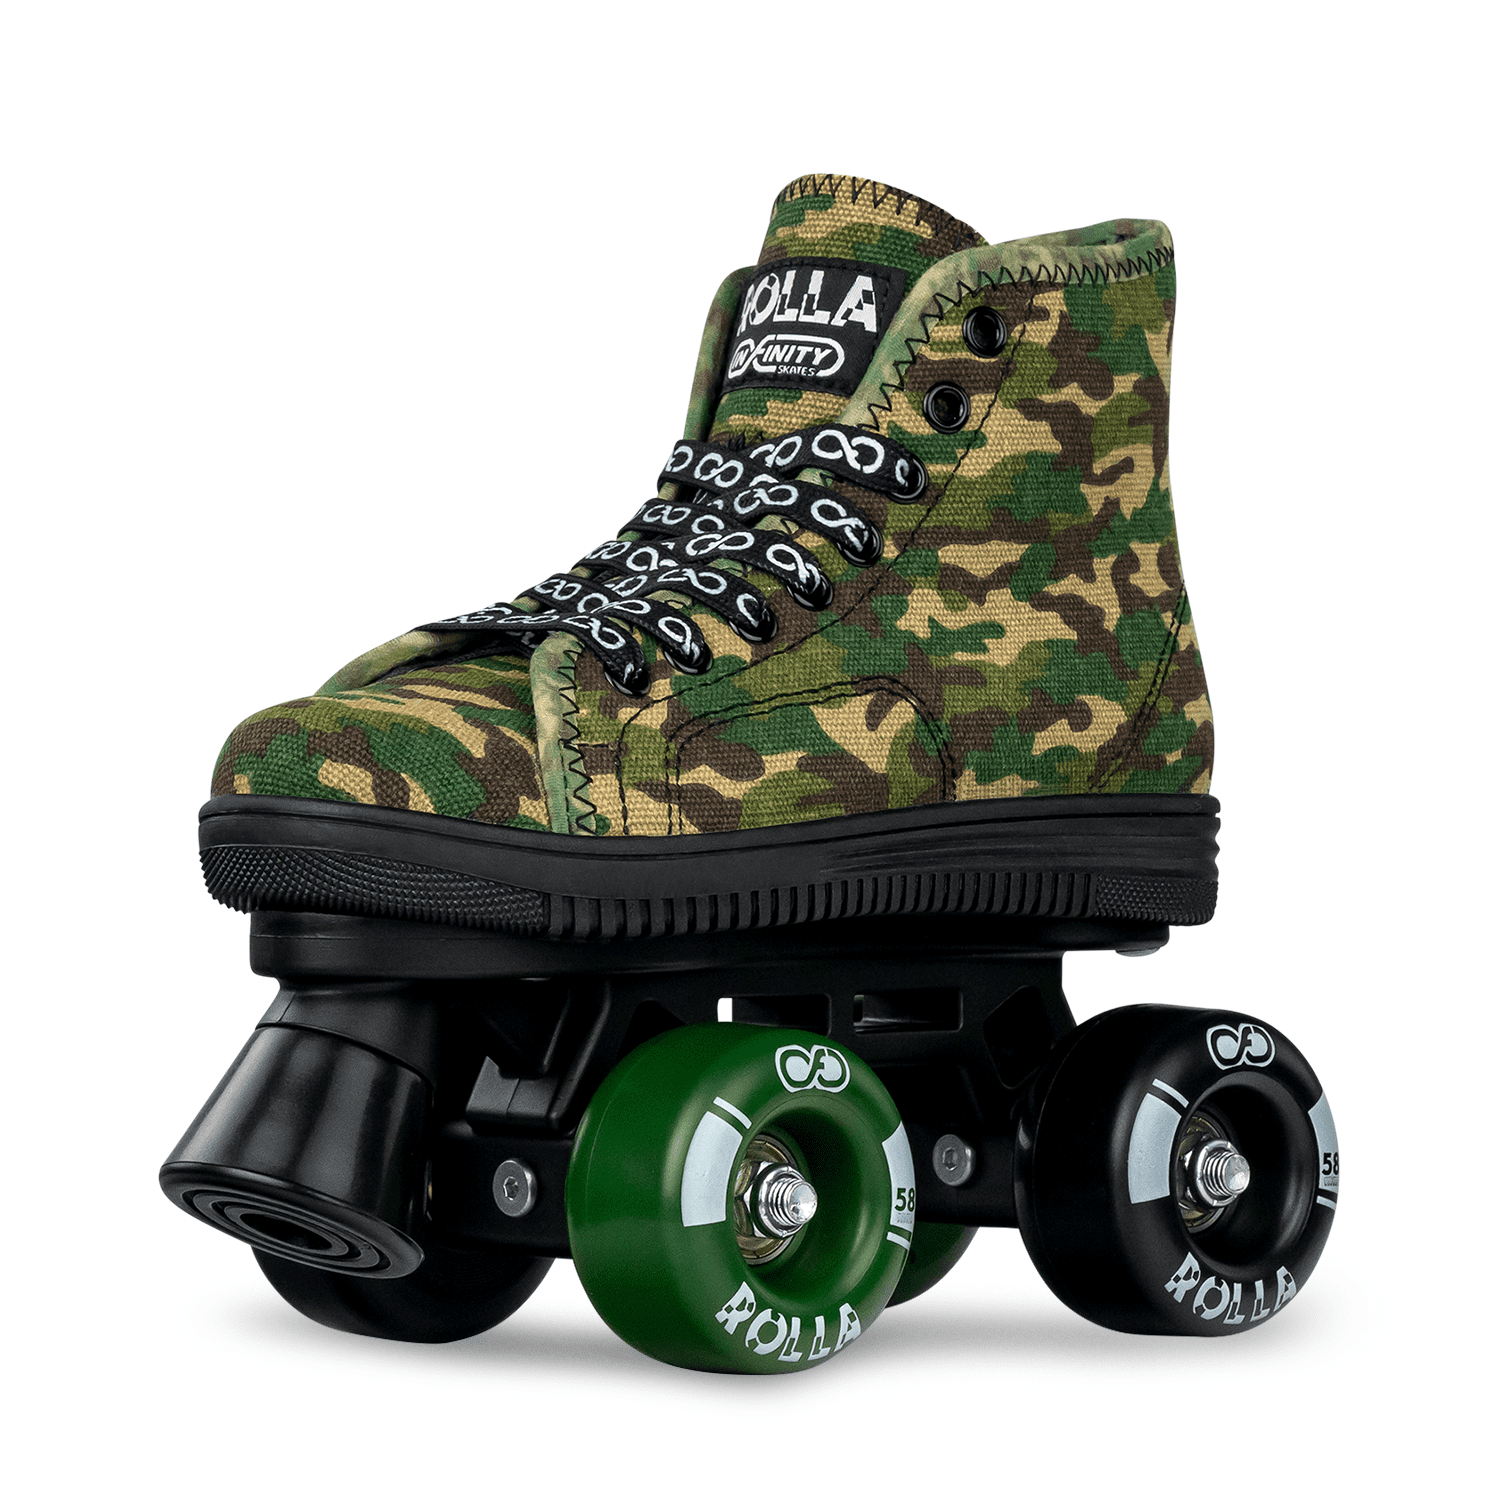 Quad Roller Skates for Kids teenagers Boys and Girls size 4 Youth Green Camo S 